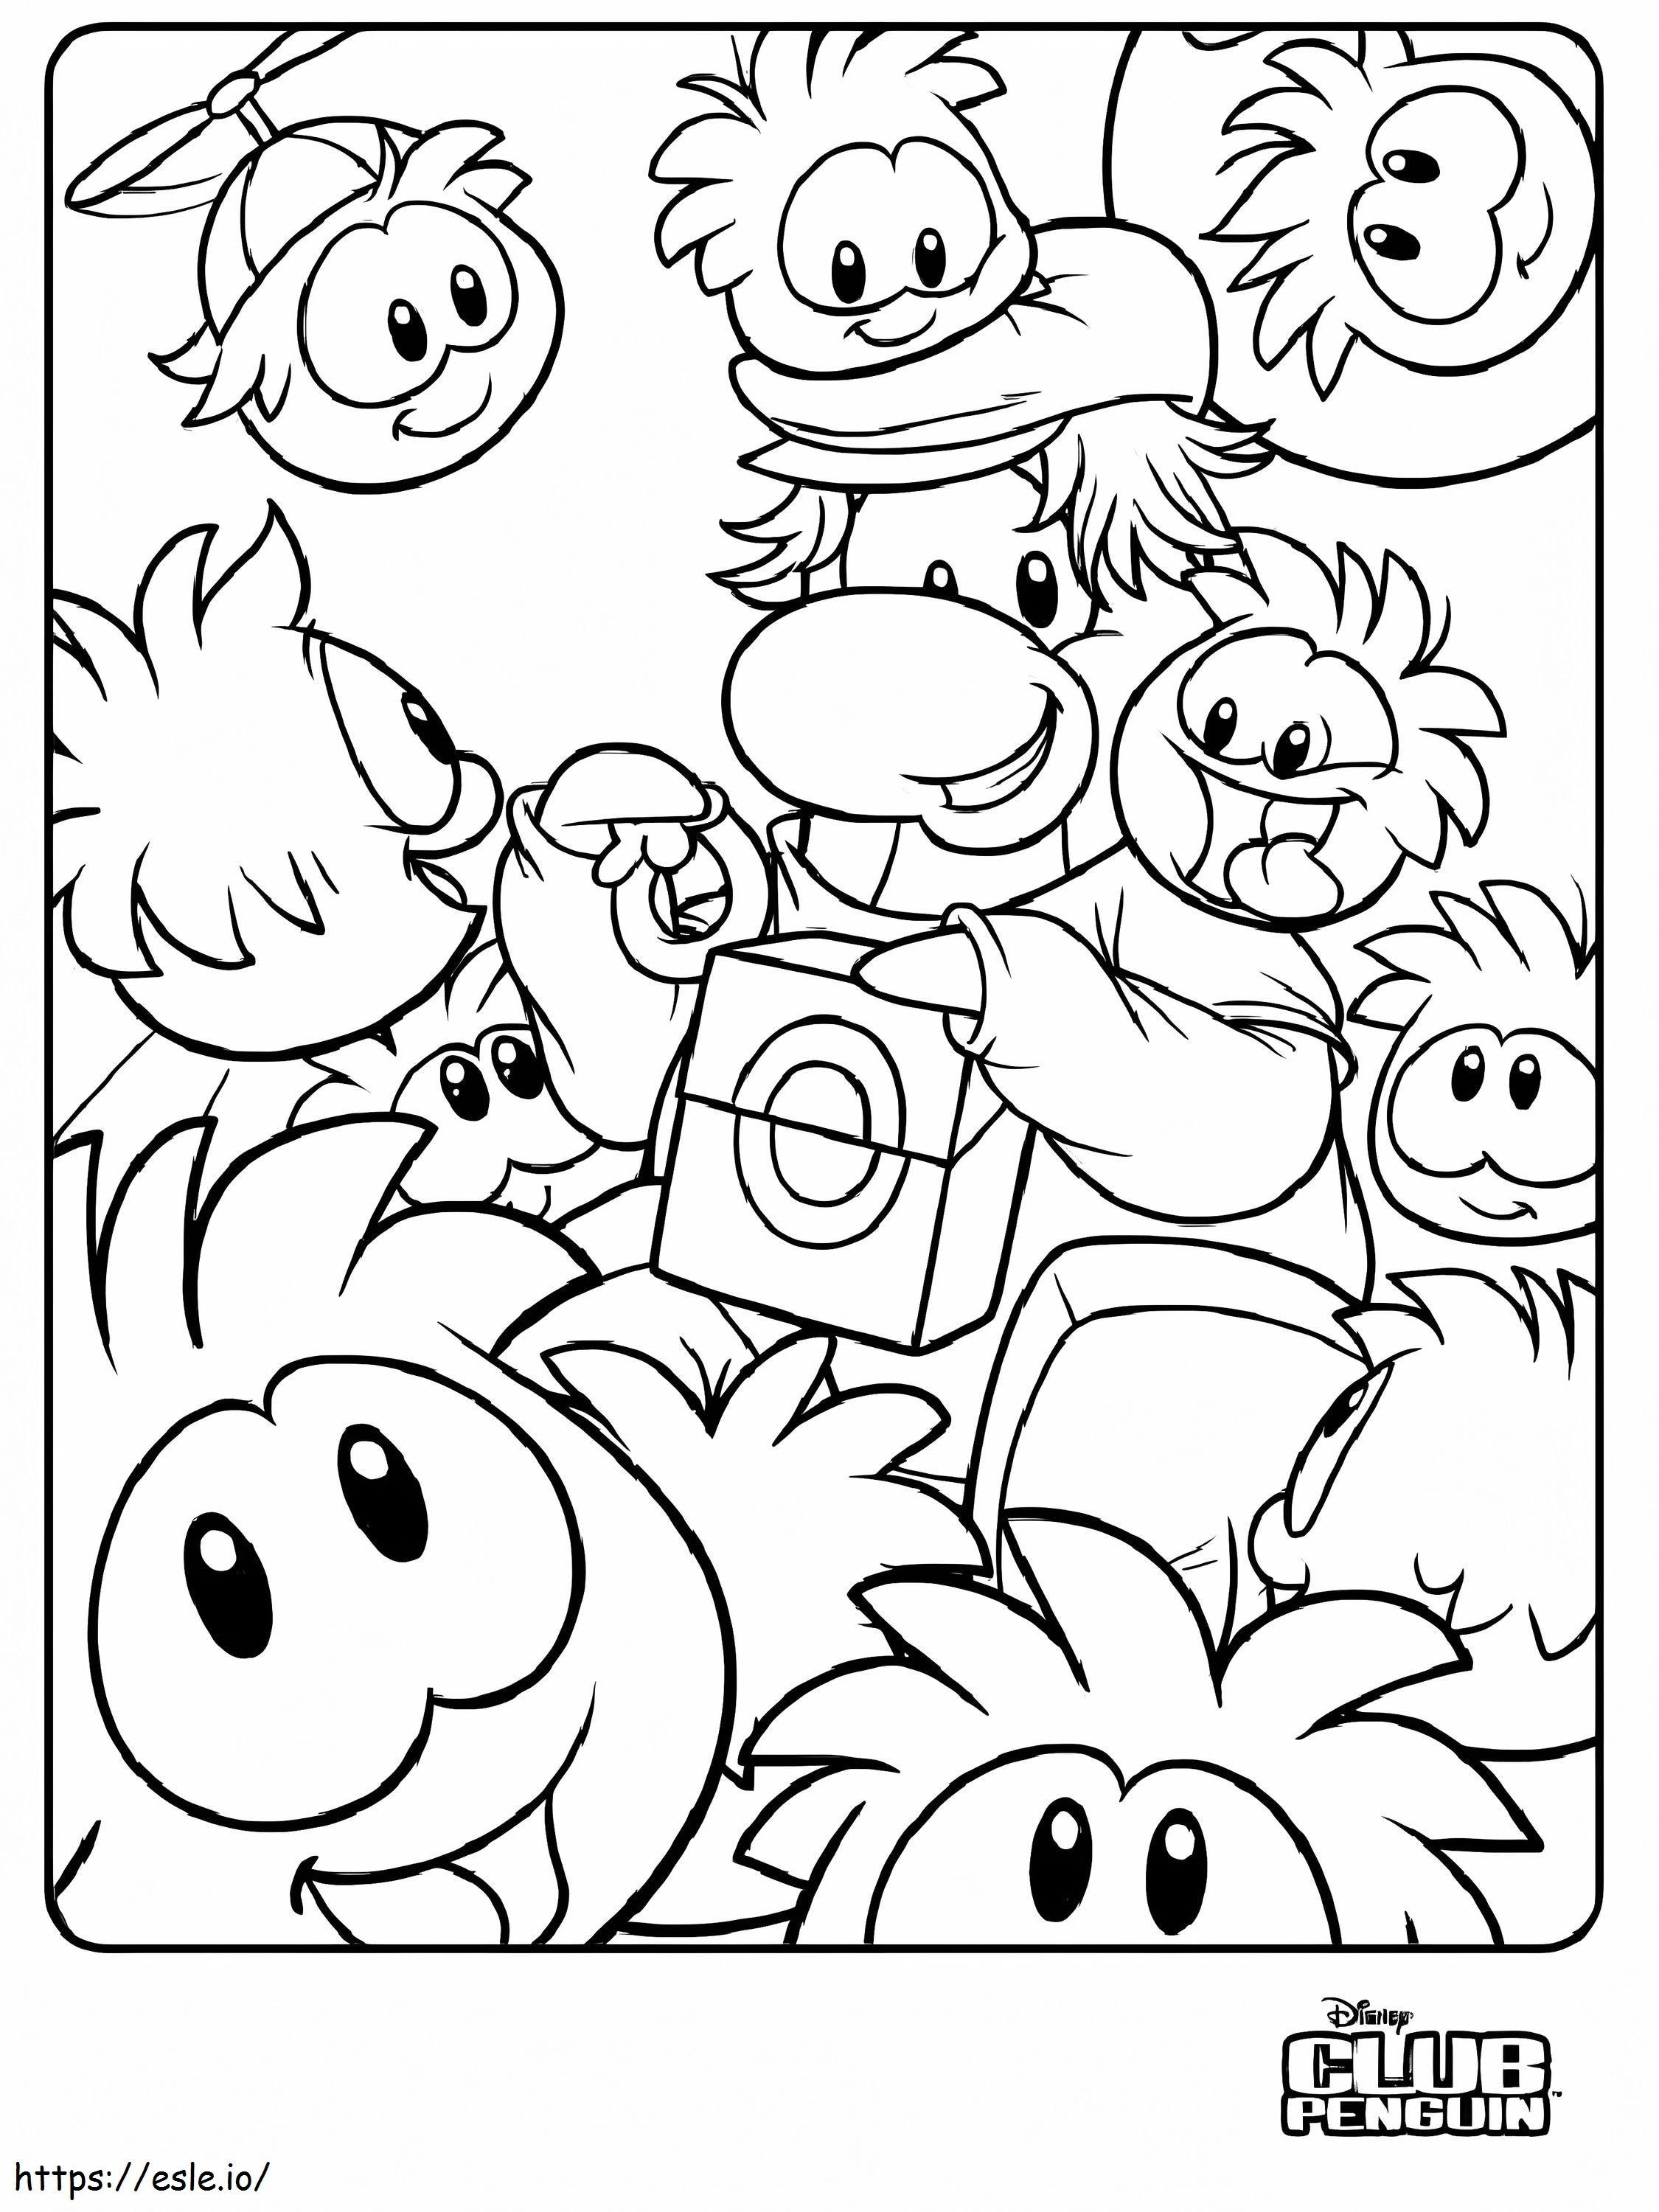 Club Penguin 2 coloring page